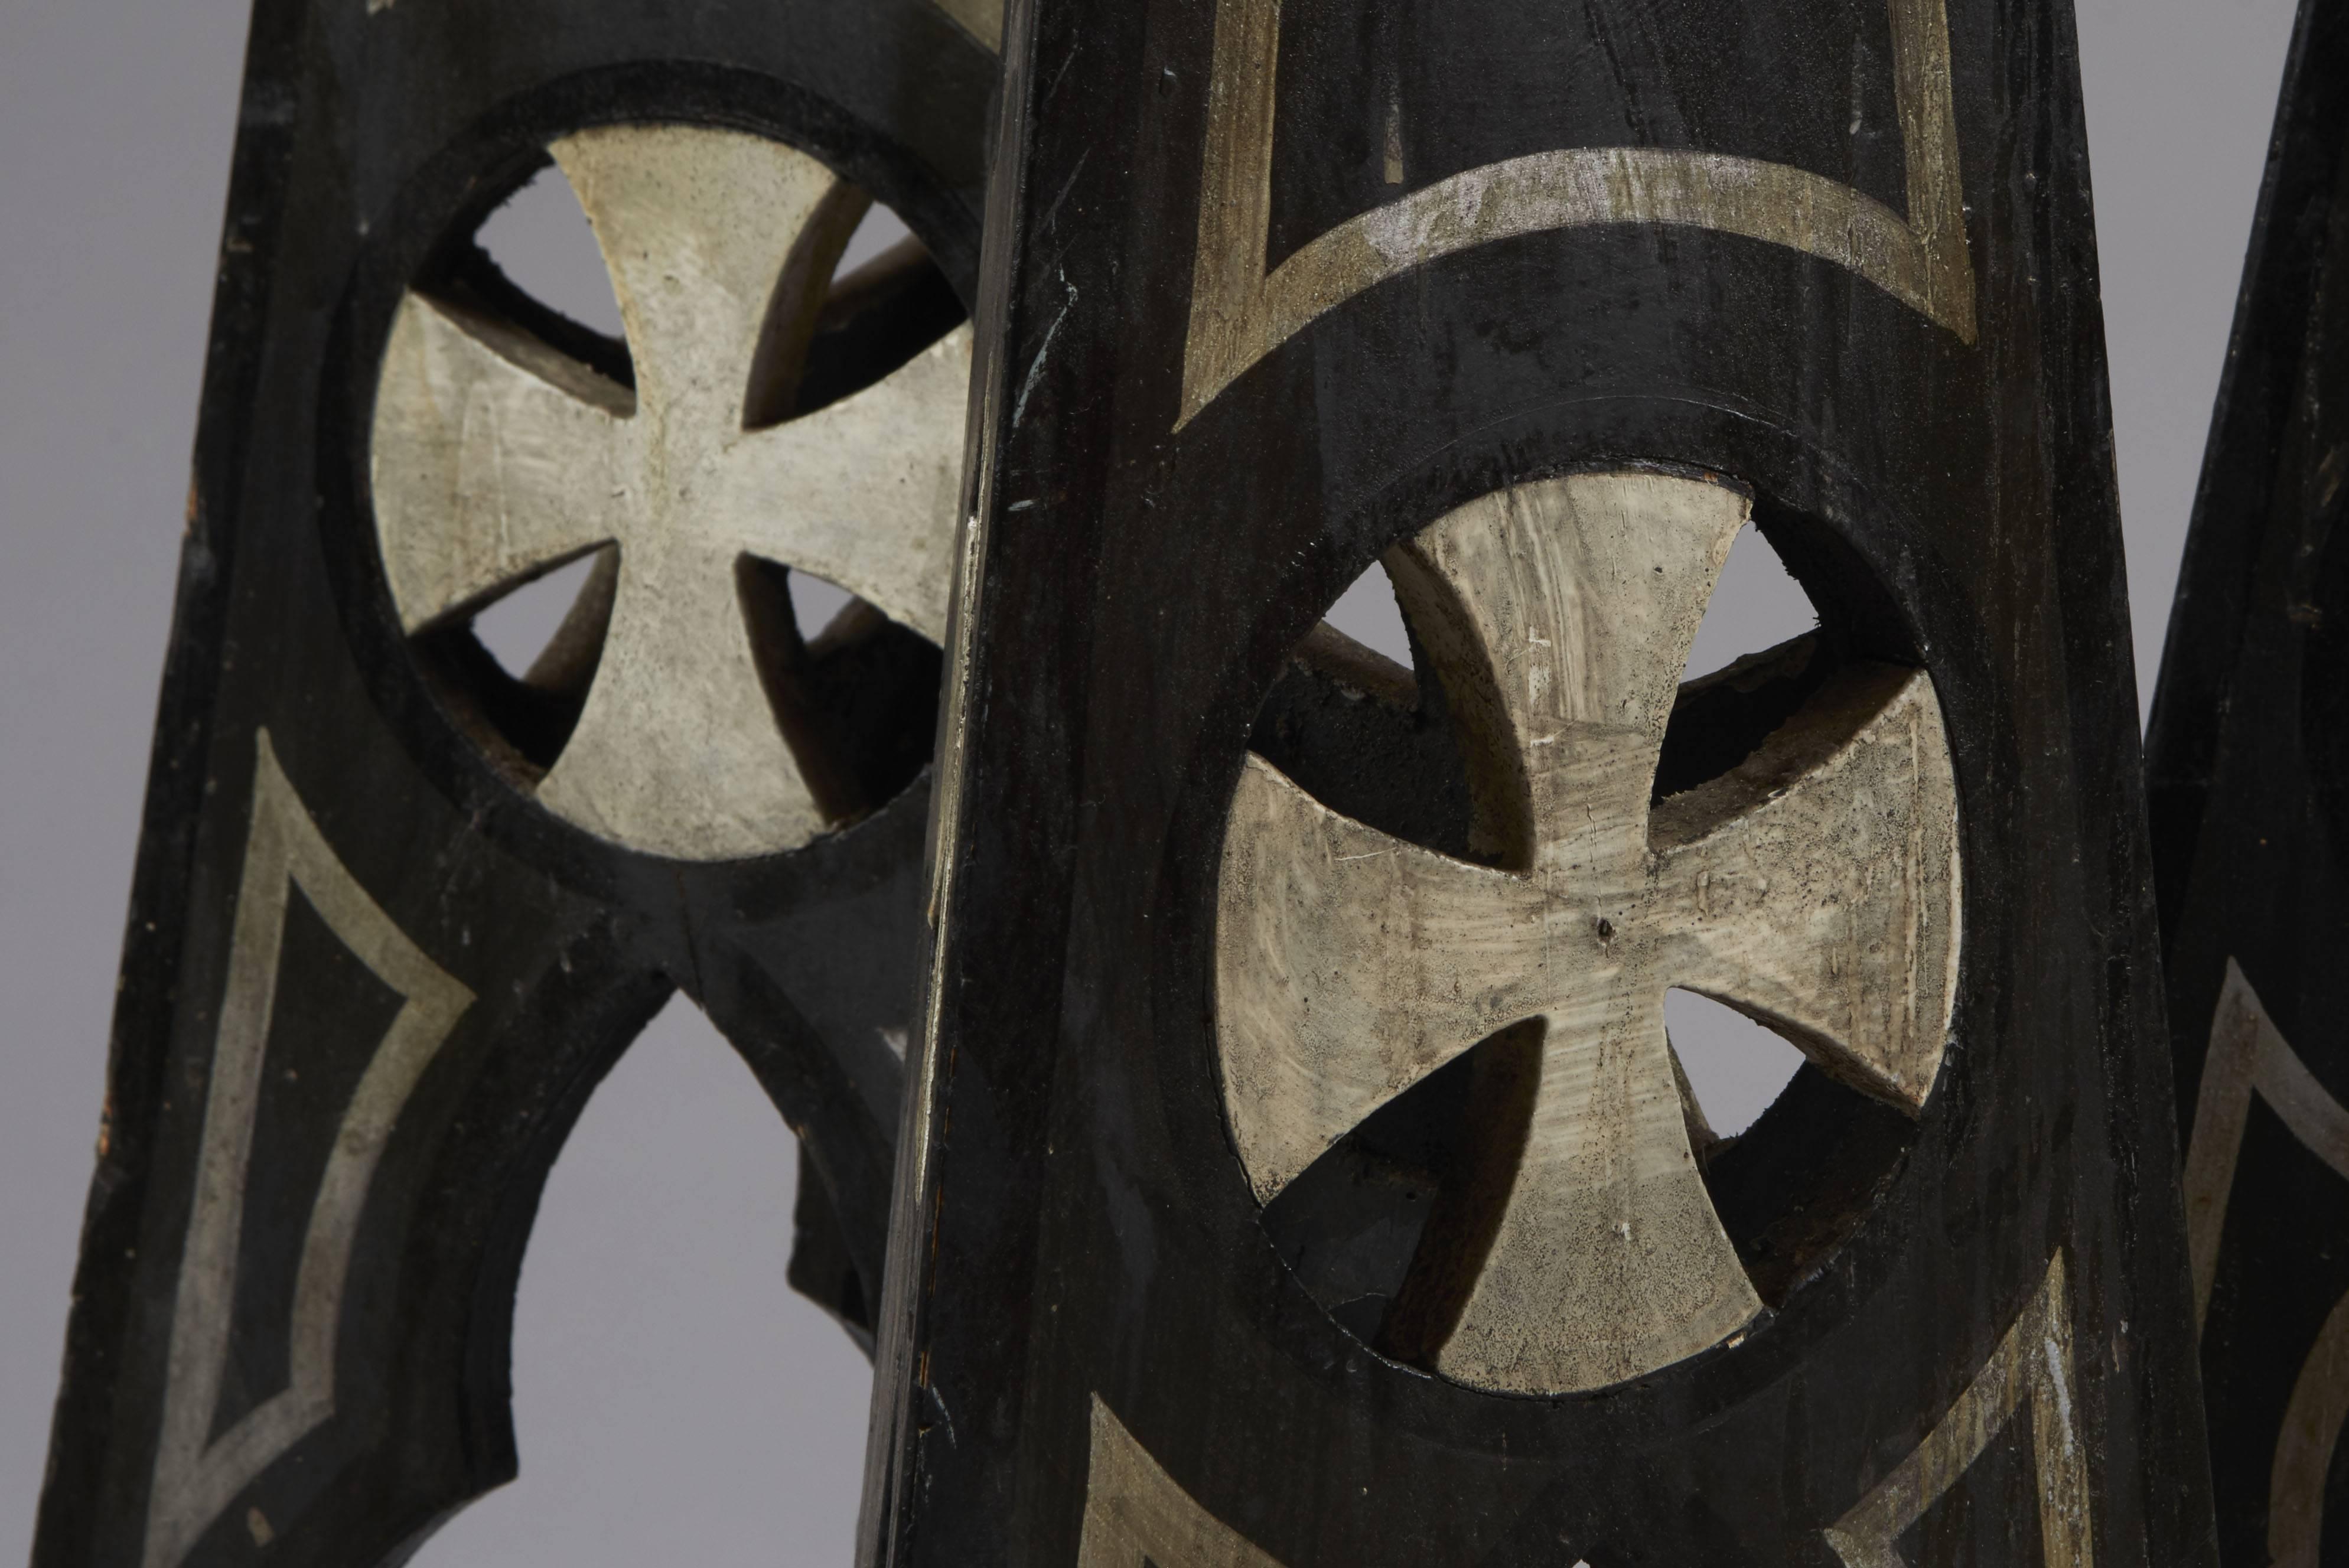 Set of five large carved wooden black lacquer with white patterns candlesticks - tripod feet, neo-Gothic, Sweden, circa 1830. Dimension: H 101 x L foot 27 cm.